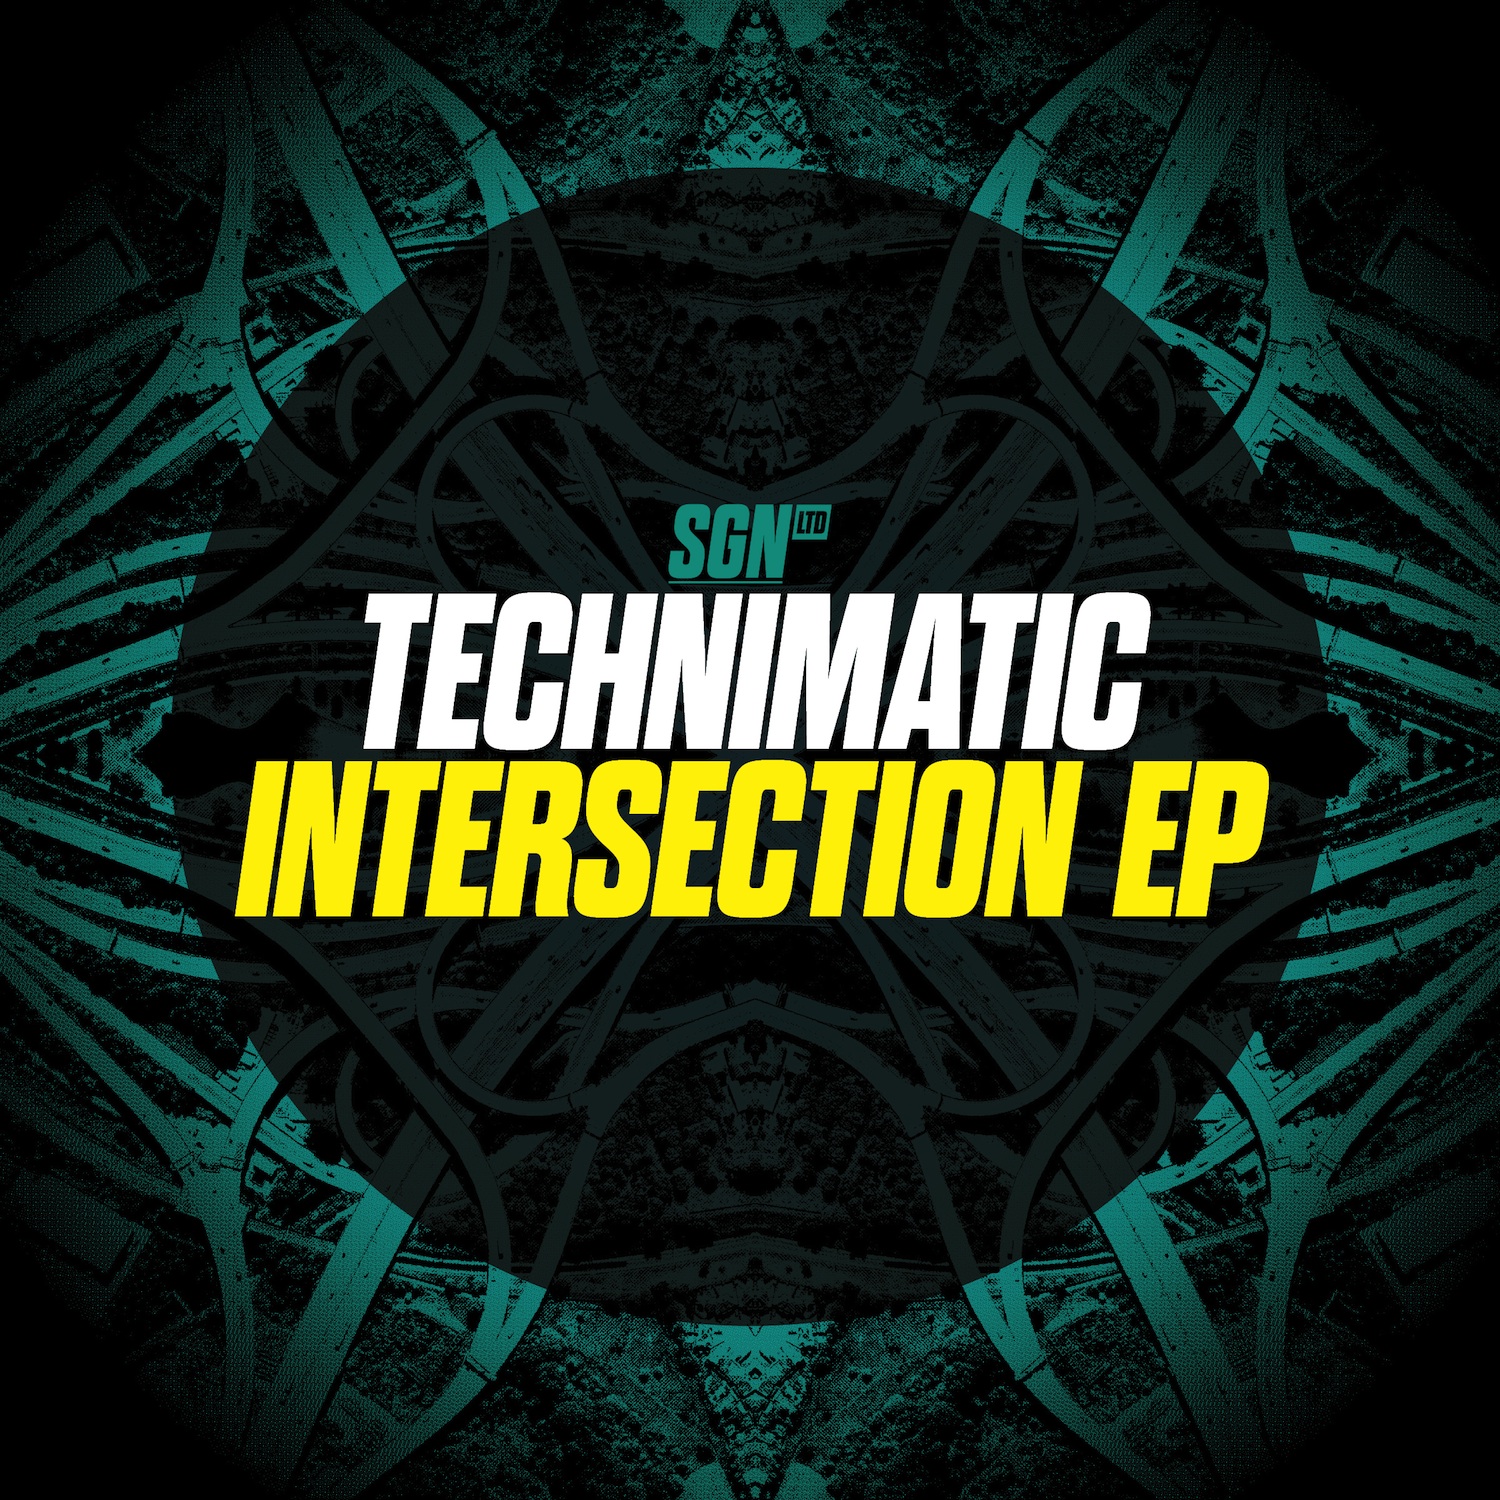 Technimatic/INTERSECTION EP D12"